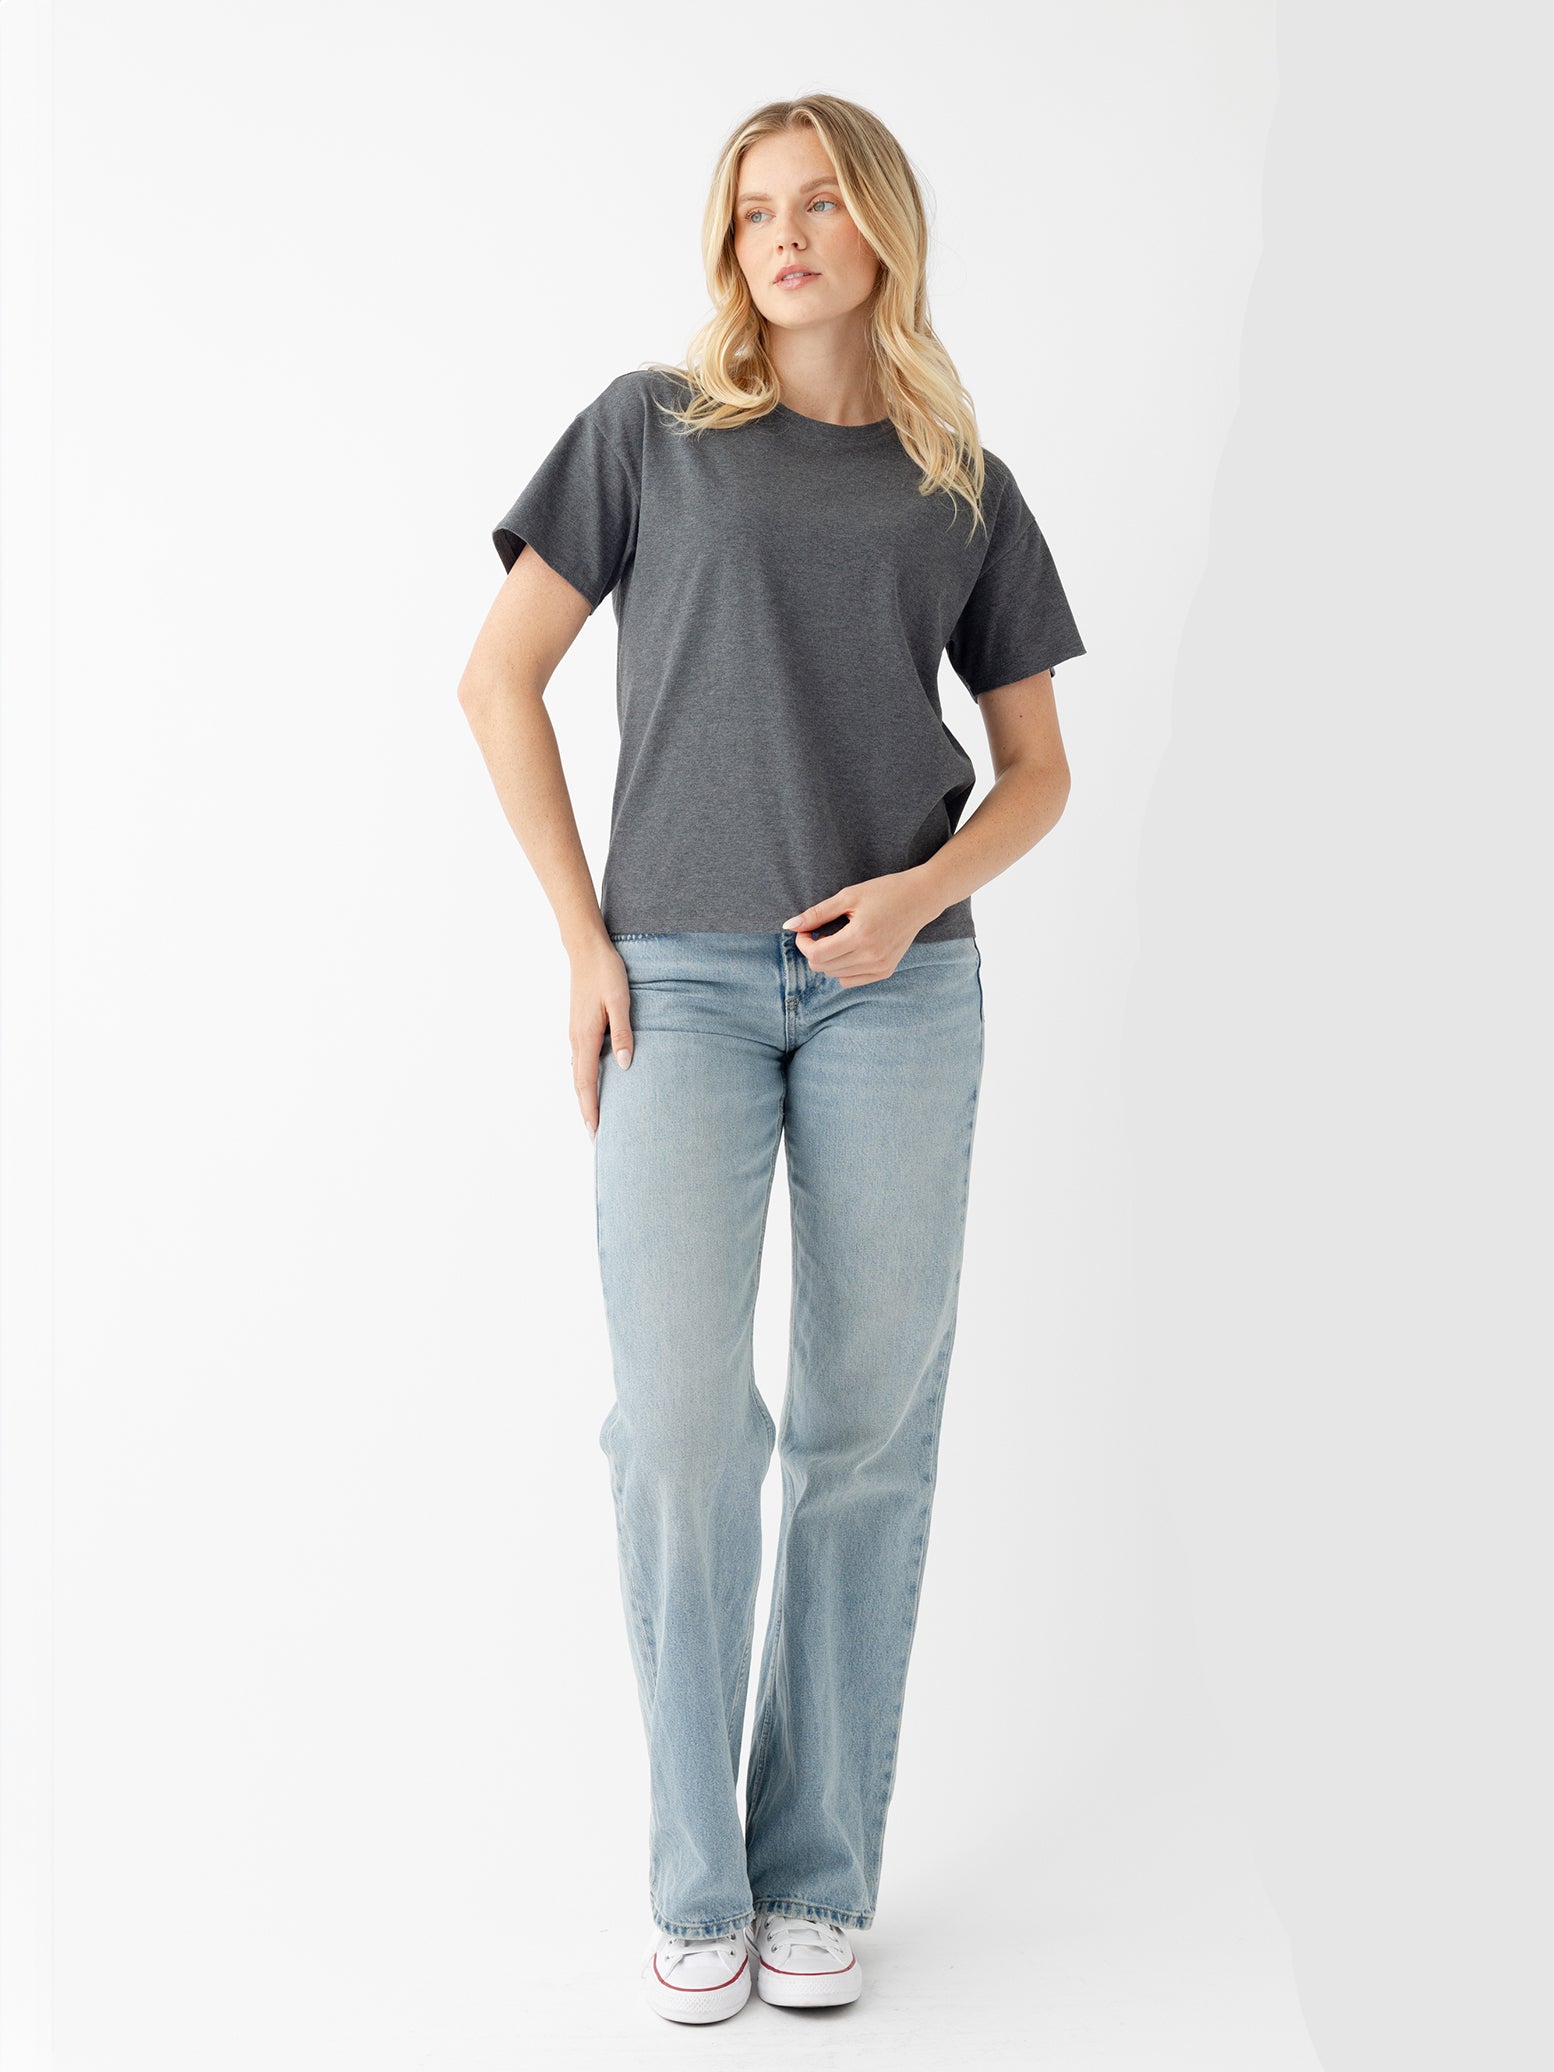 Woman wearing coal heather tee and jeans with white background 